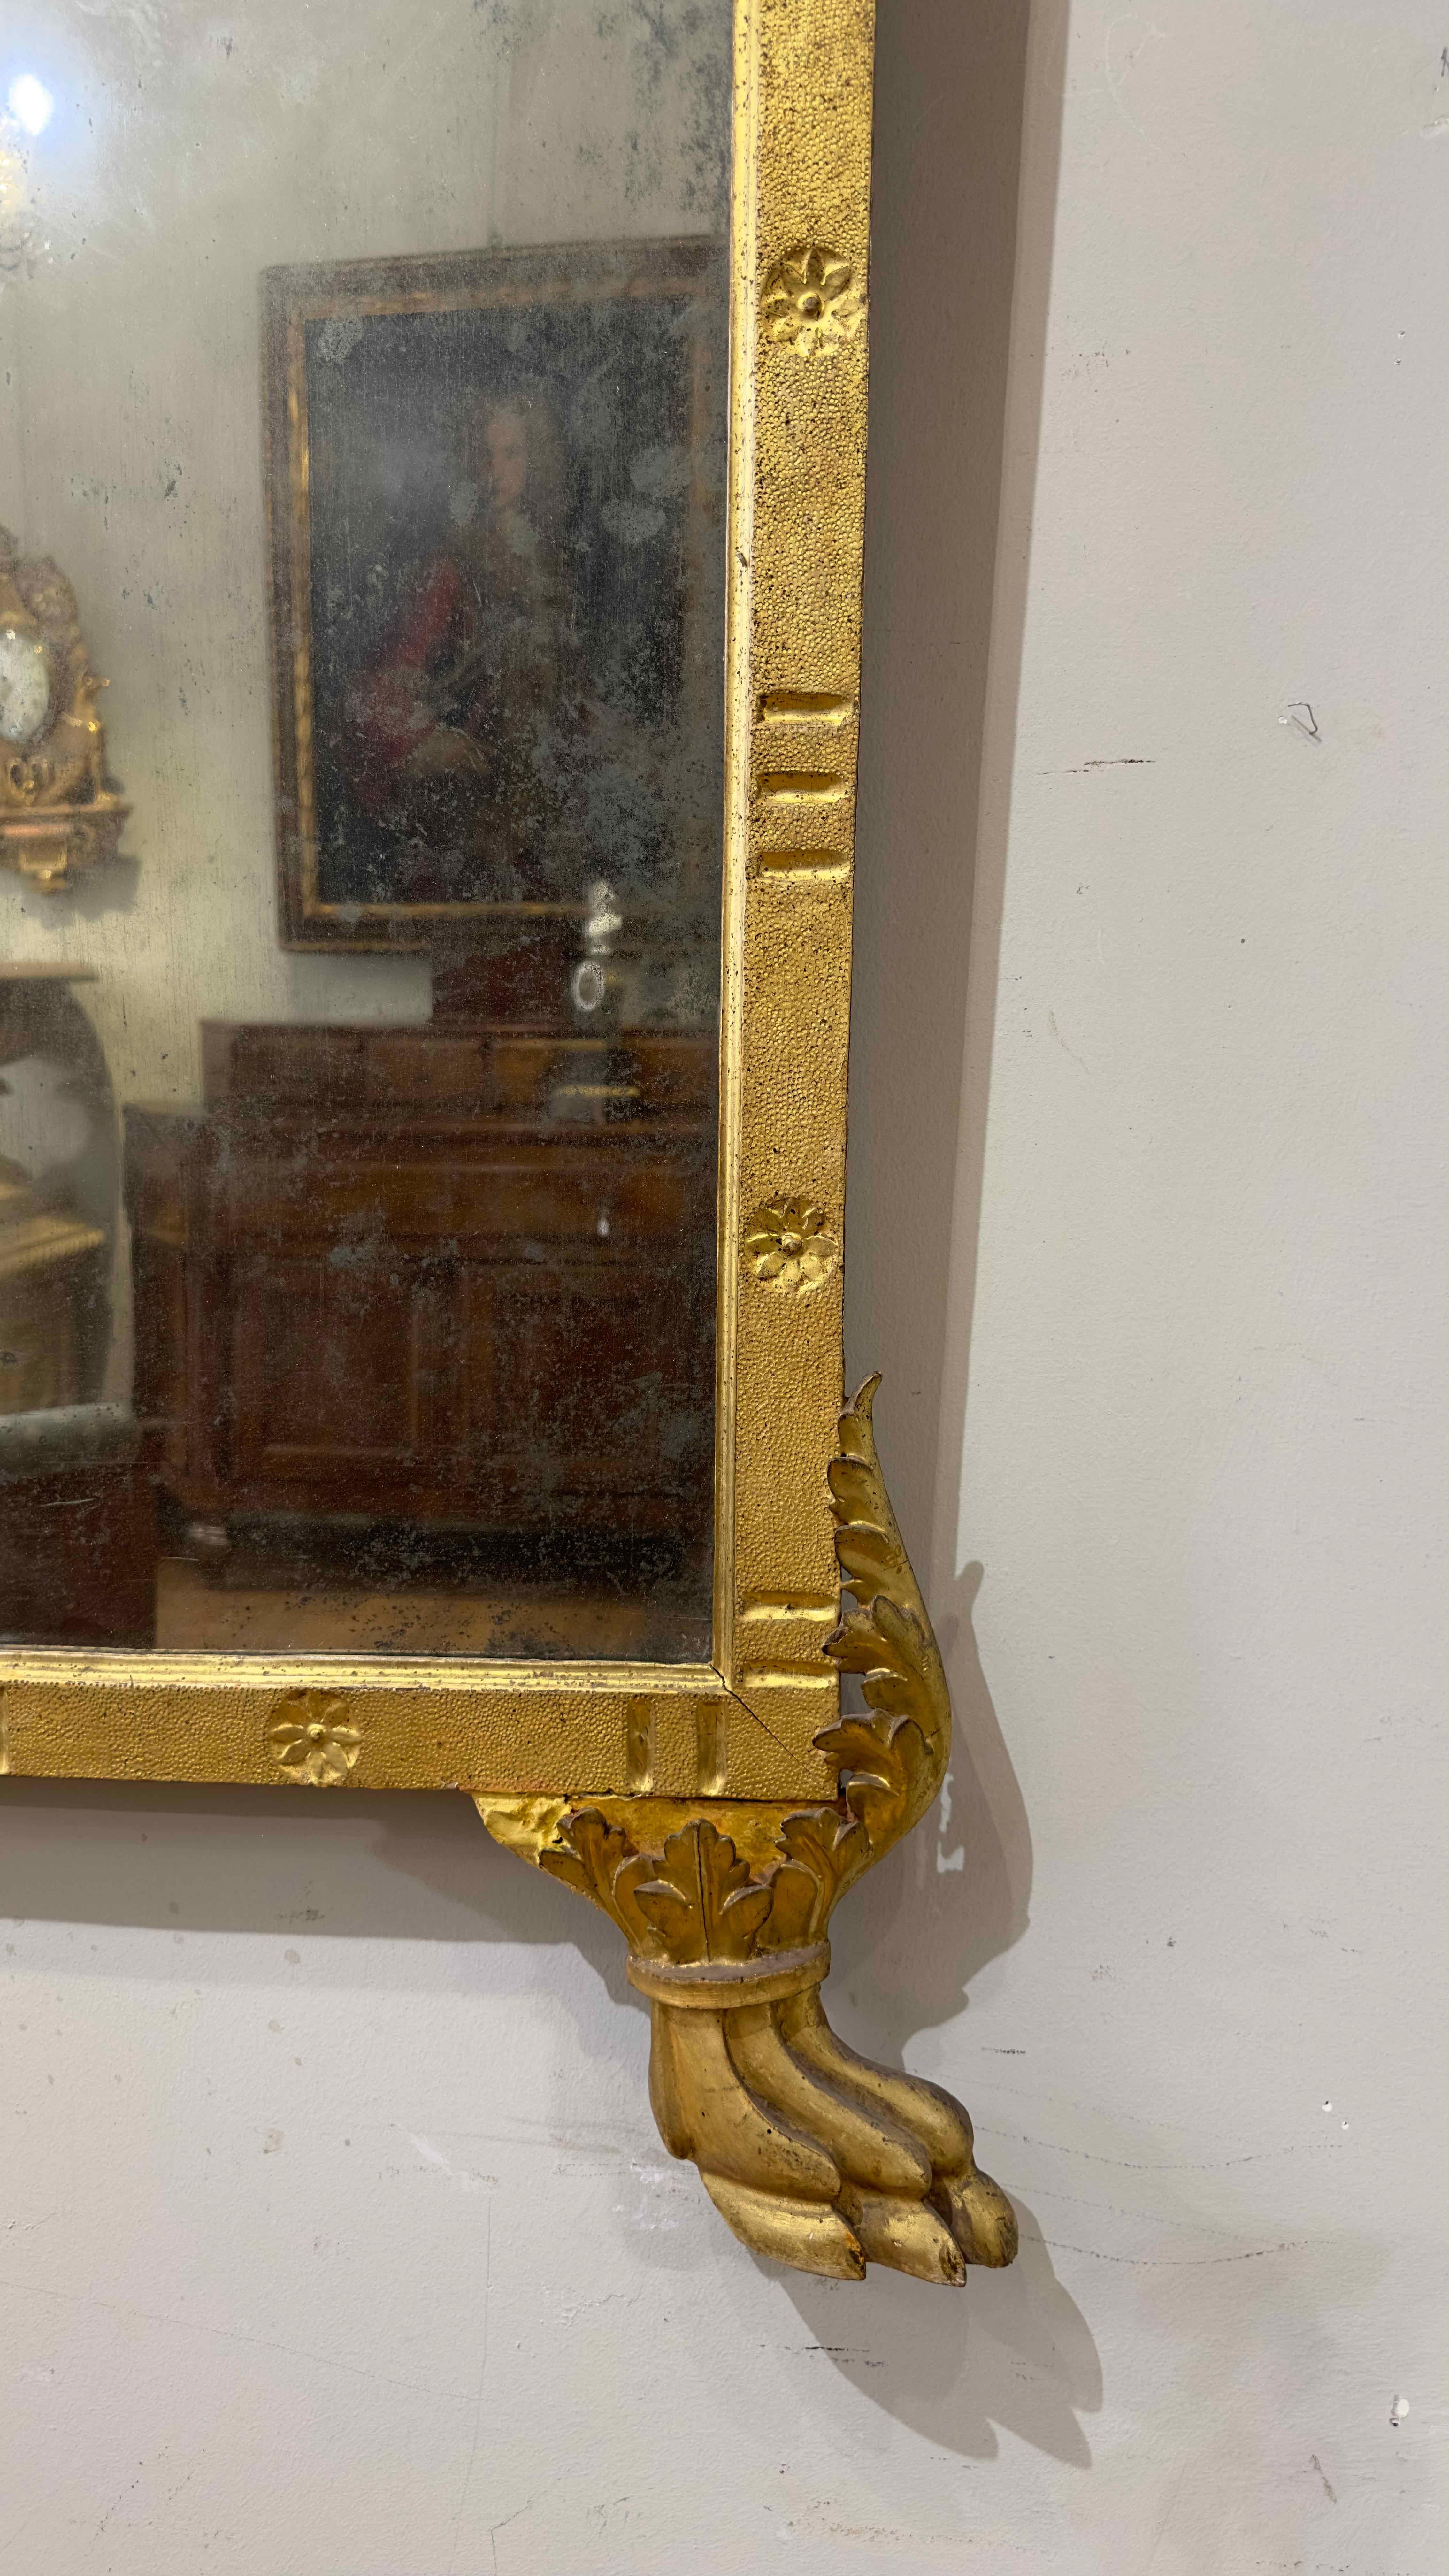 END OF THE 18th CENTURY NEOCLASSICAL MIRROR WITH CORNUCOPIAS AND OLIVE BRANCHES  3